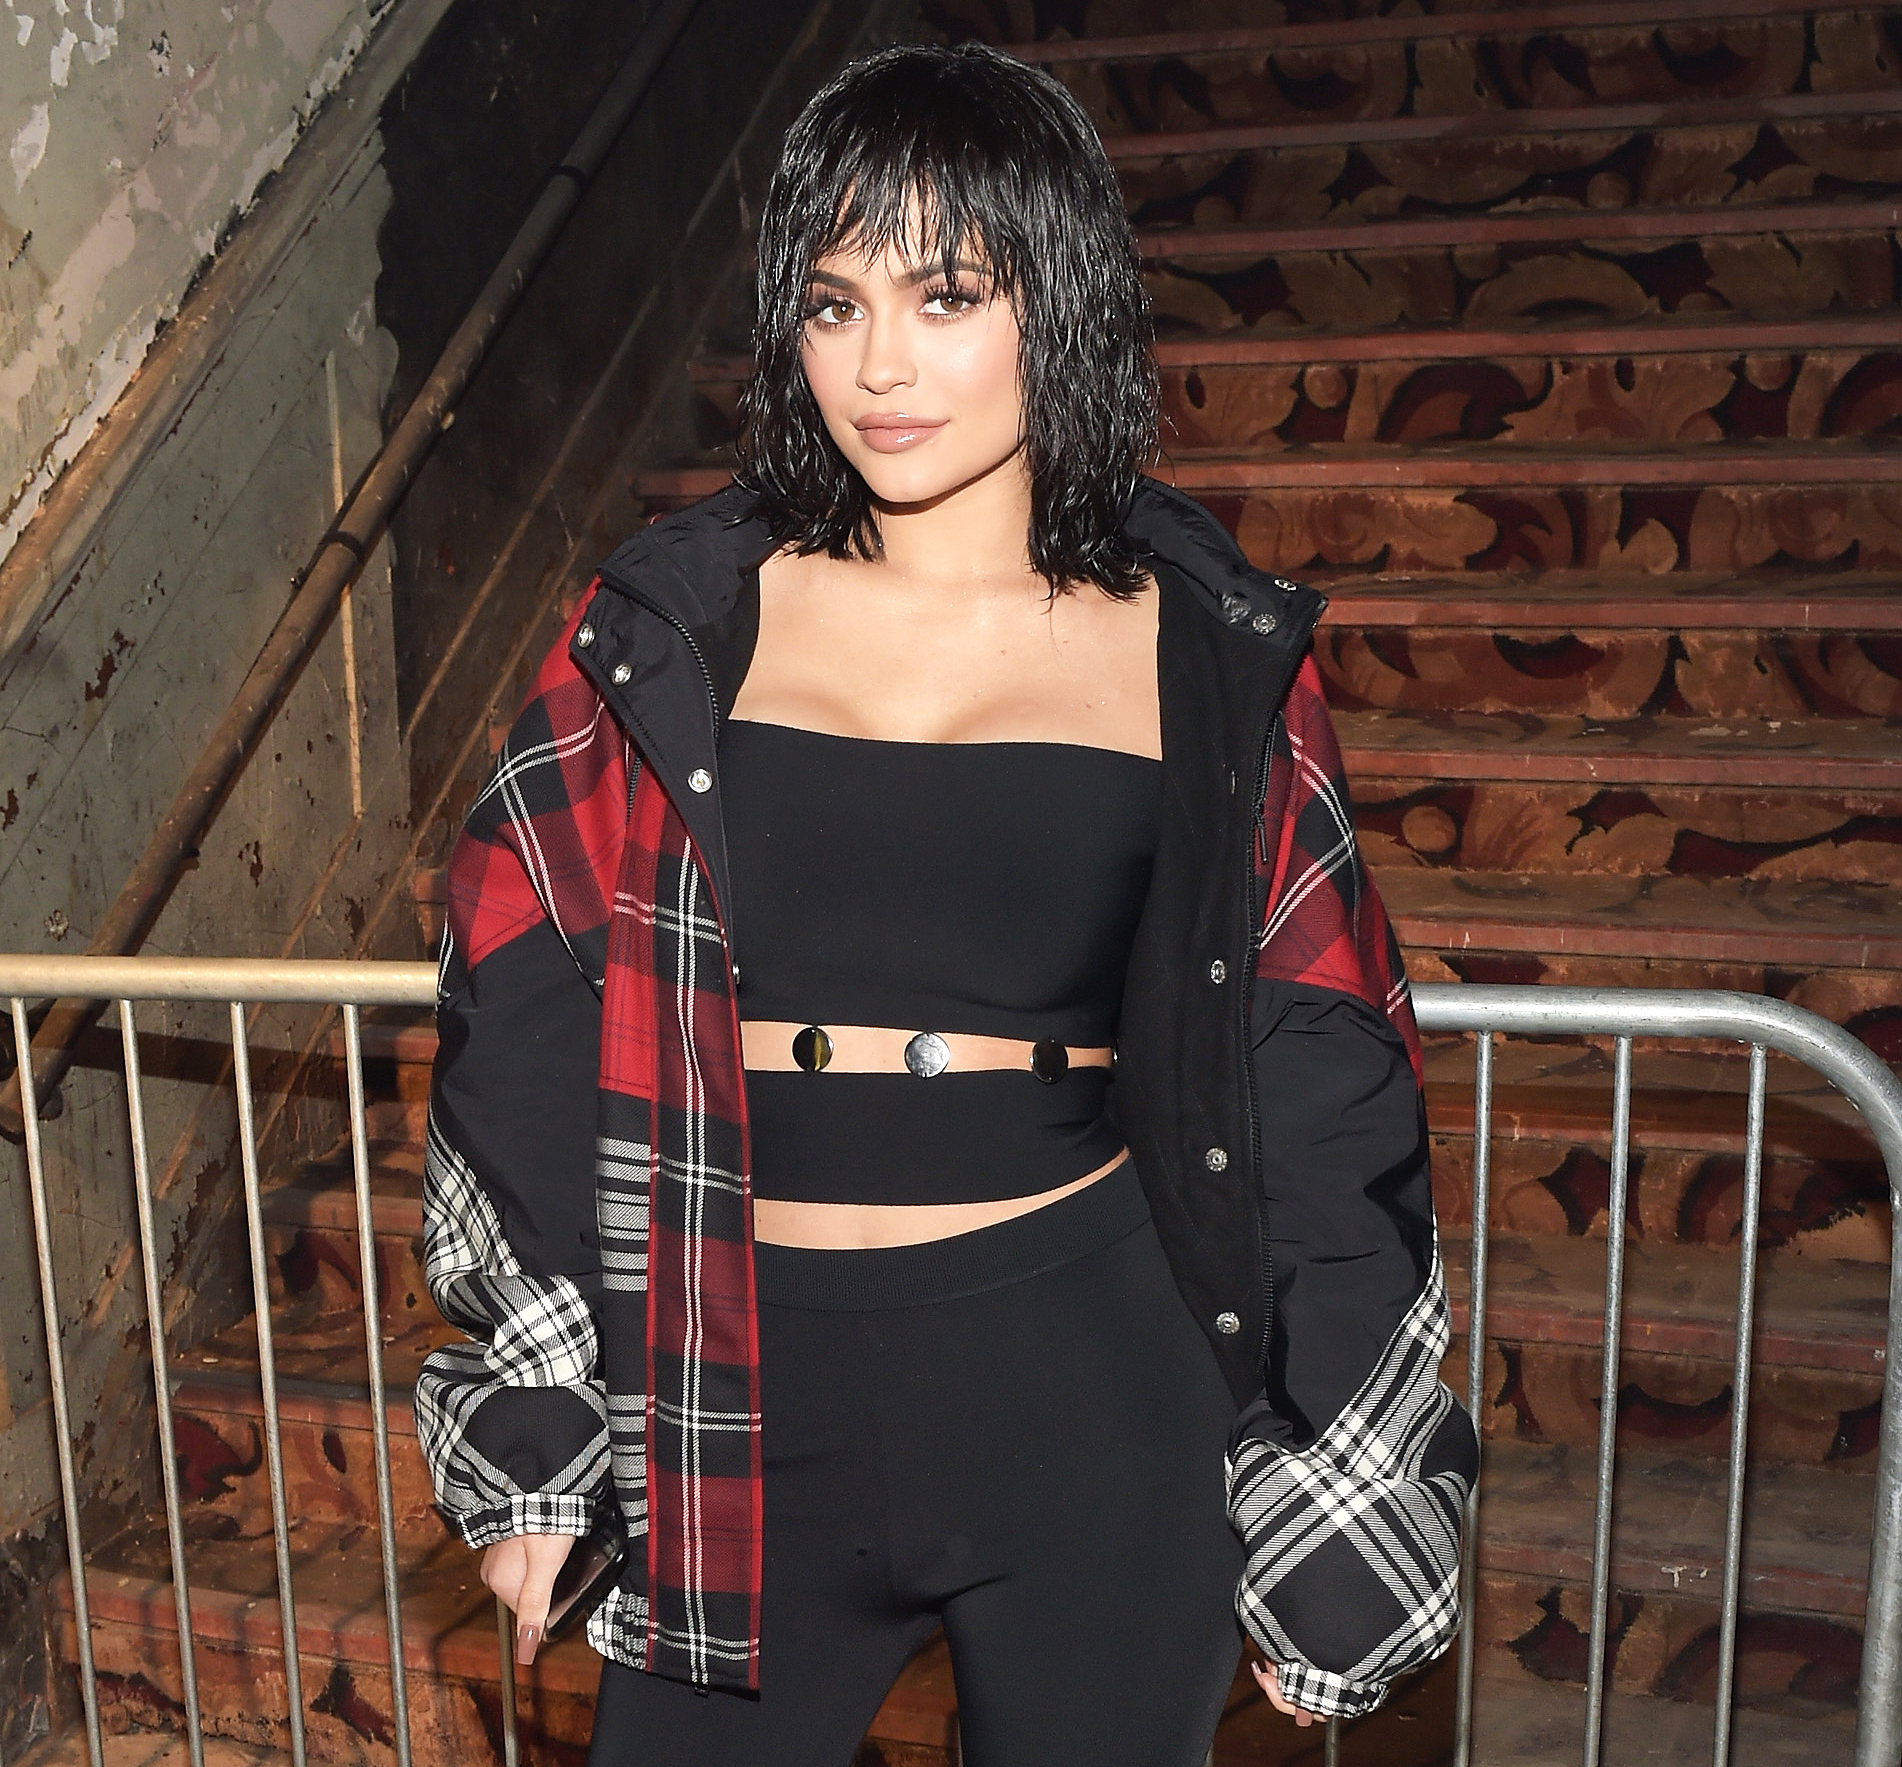 Kylie Jenner Matches Her Fendi Dress to Stormi's Stroller - Kylie